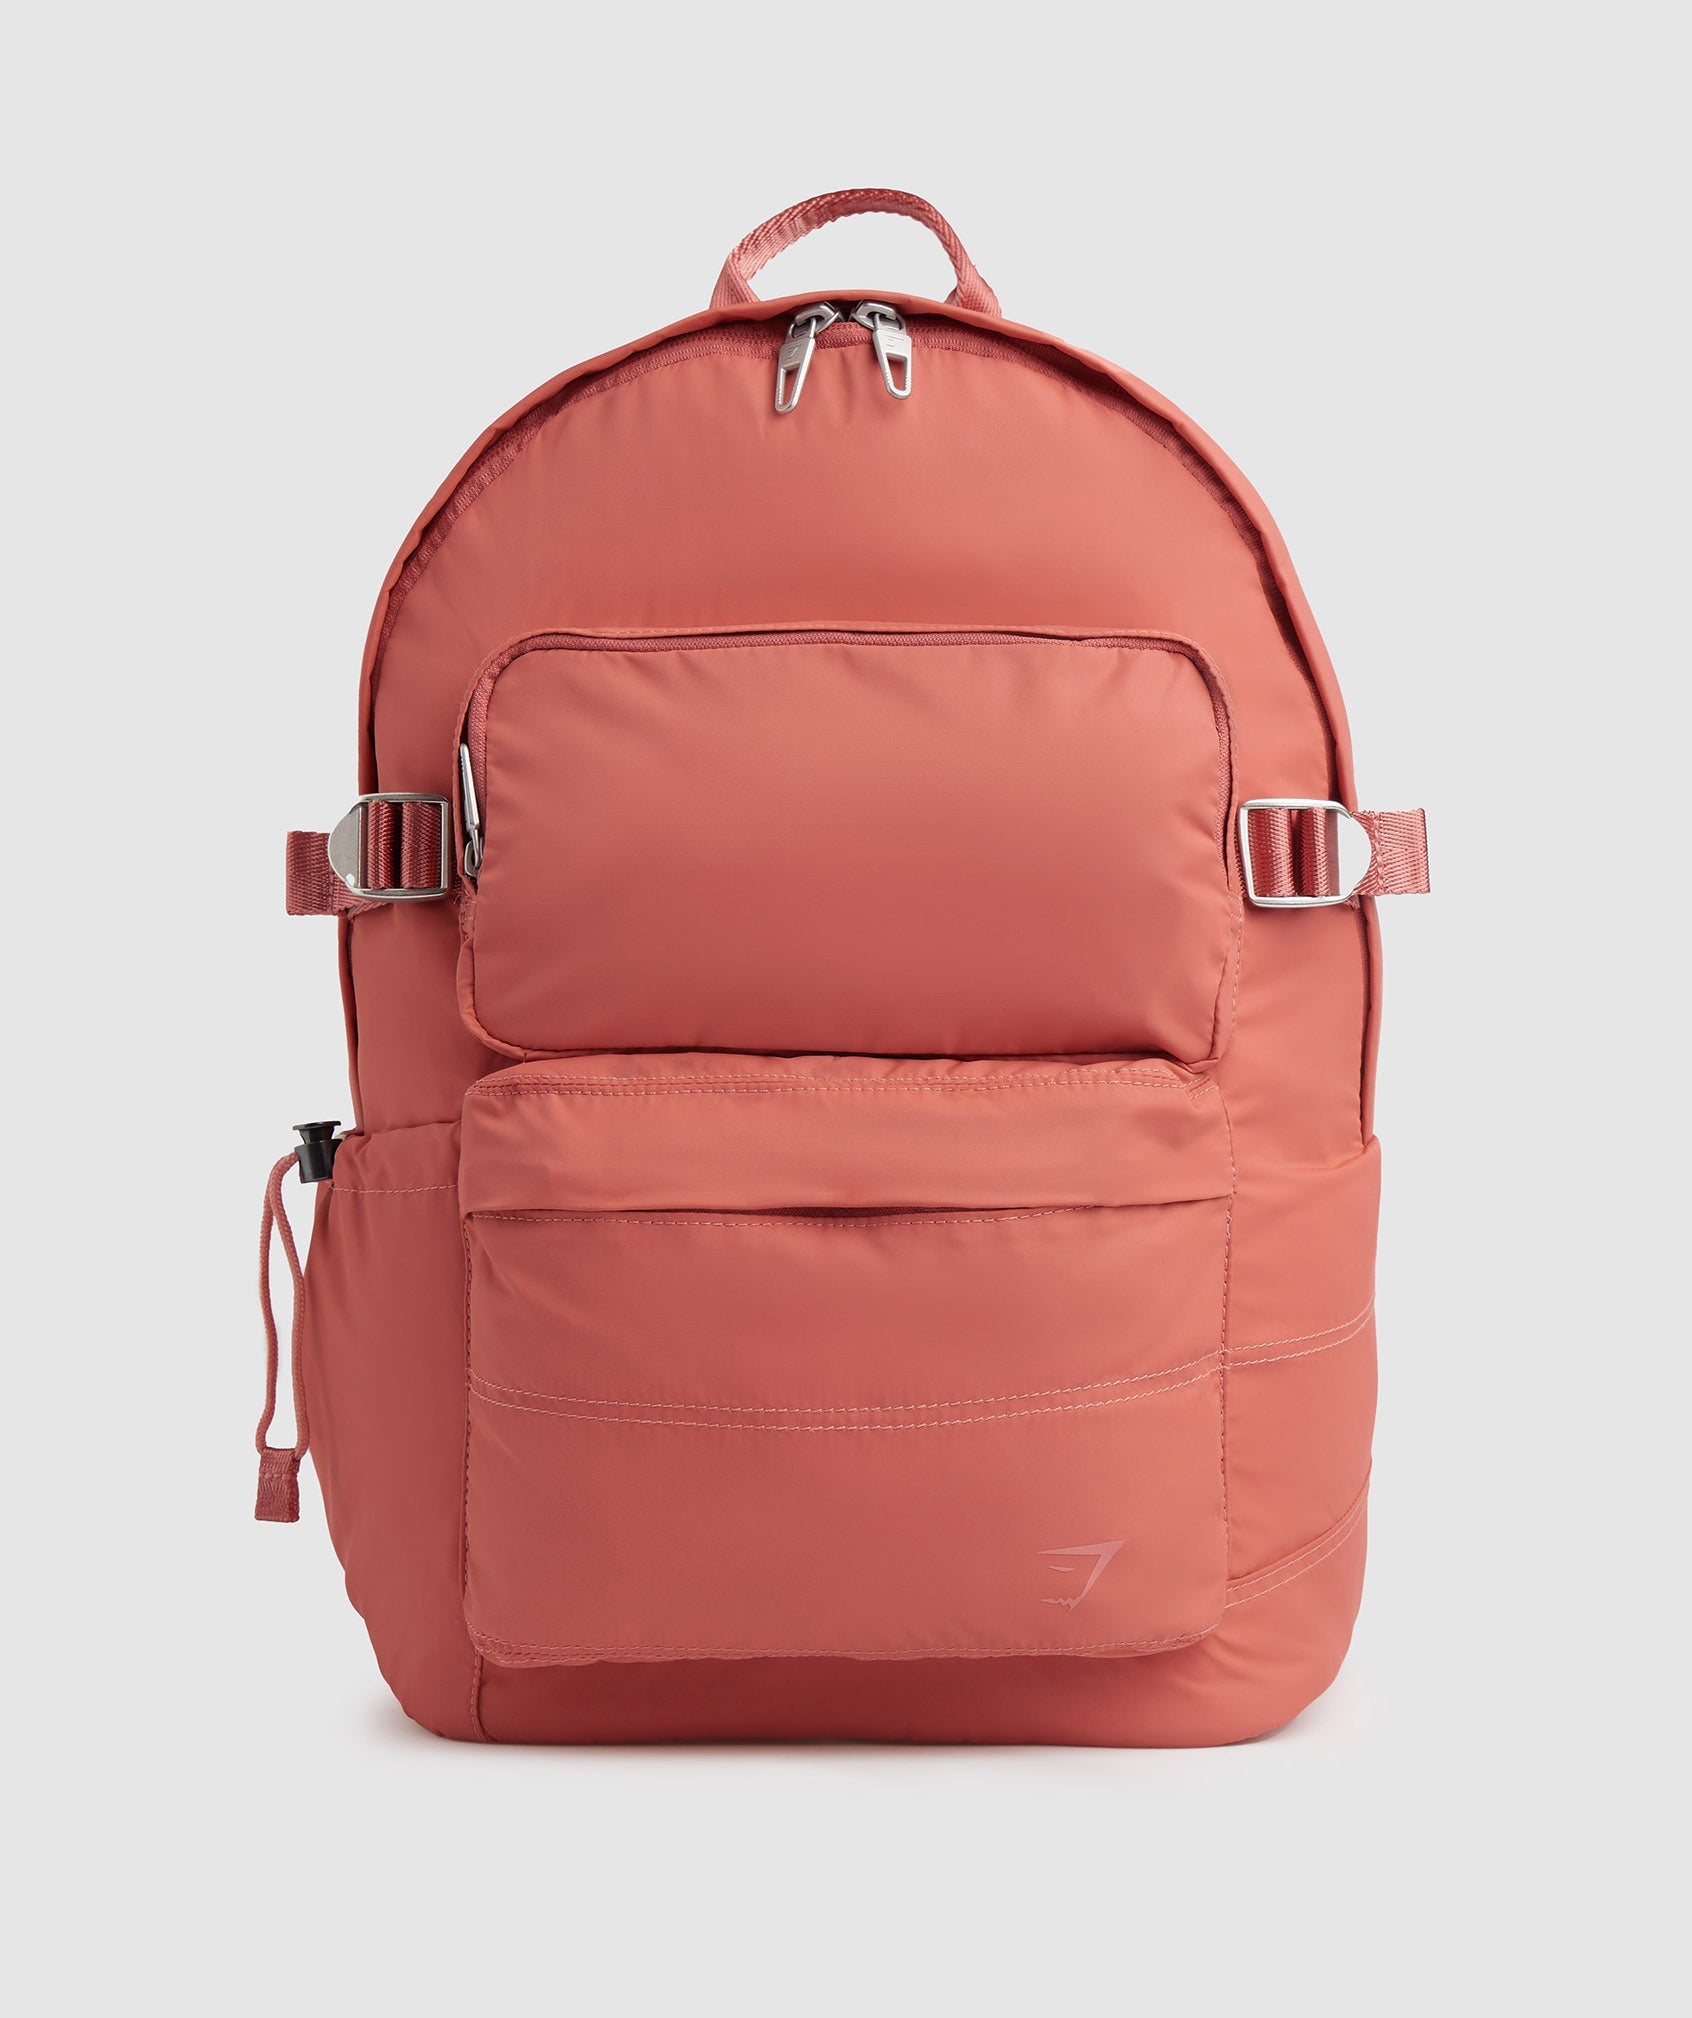 Premium Lifestyle Backpack in Terracotta Pink